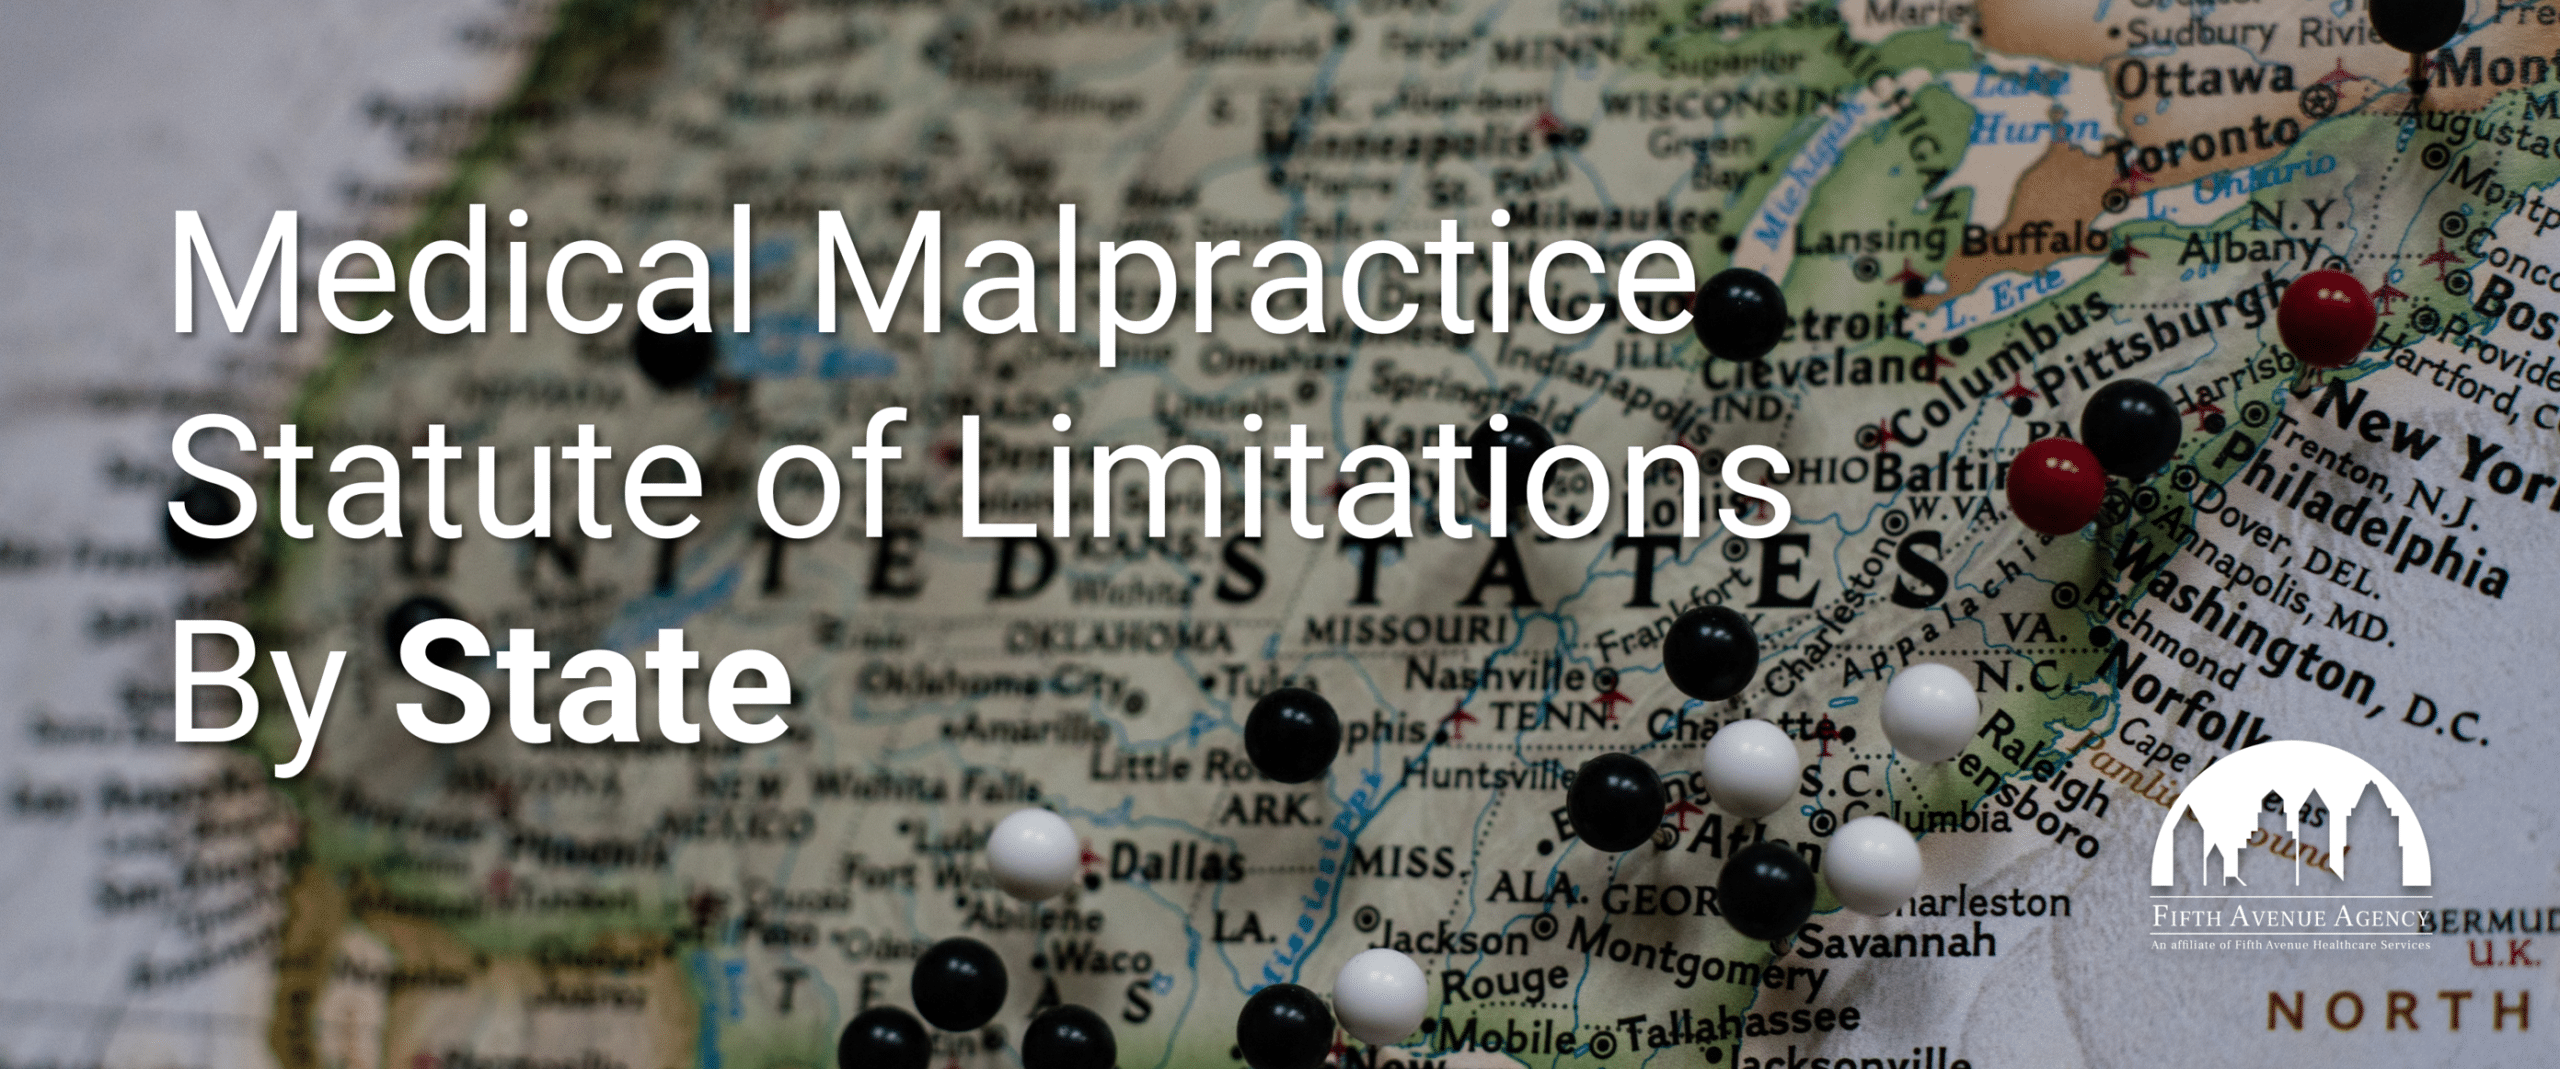 Medical Malpractice Statute Of Limitations By State